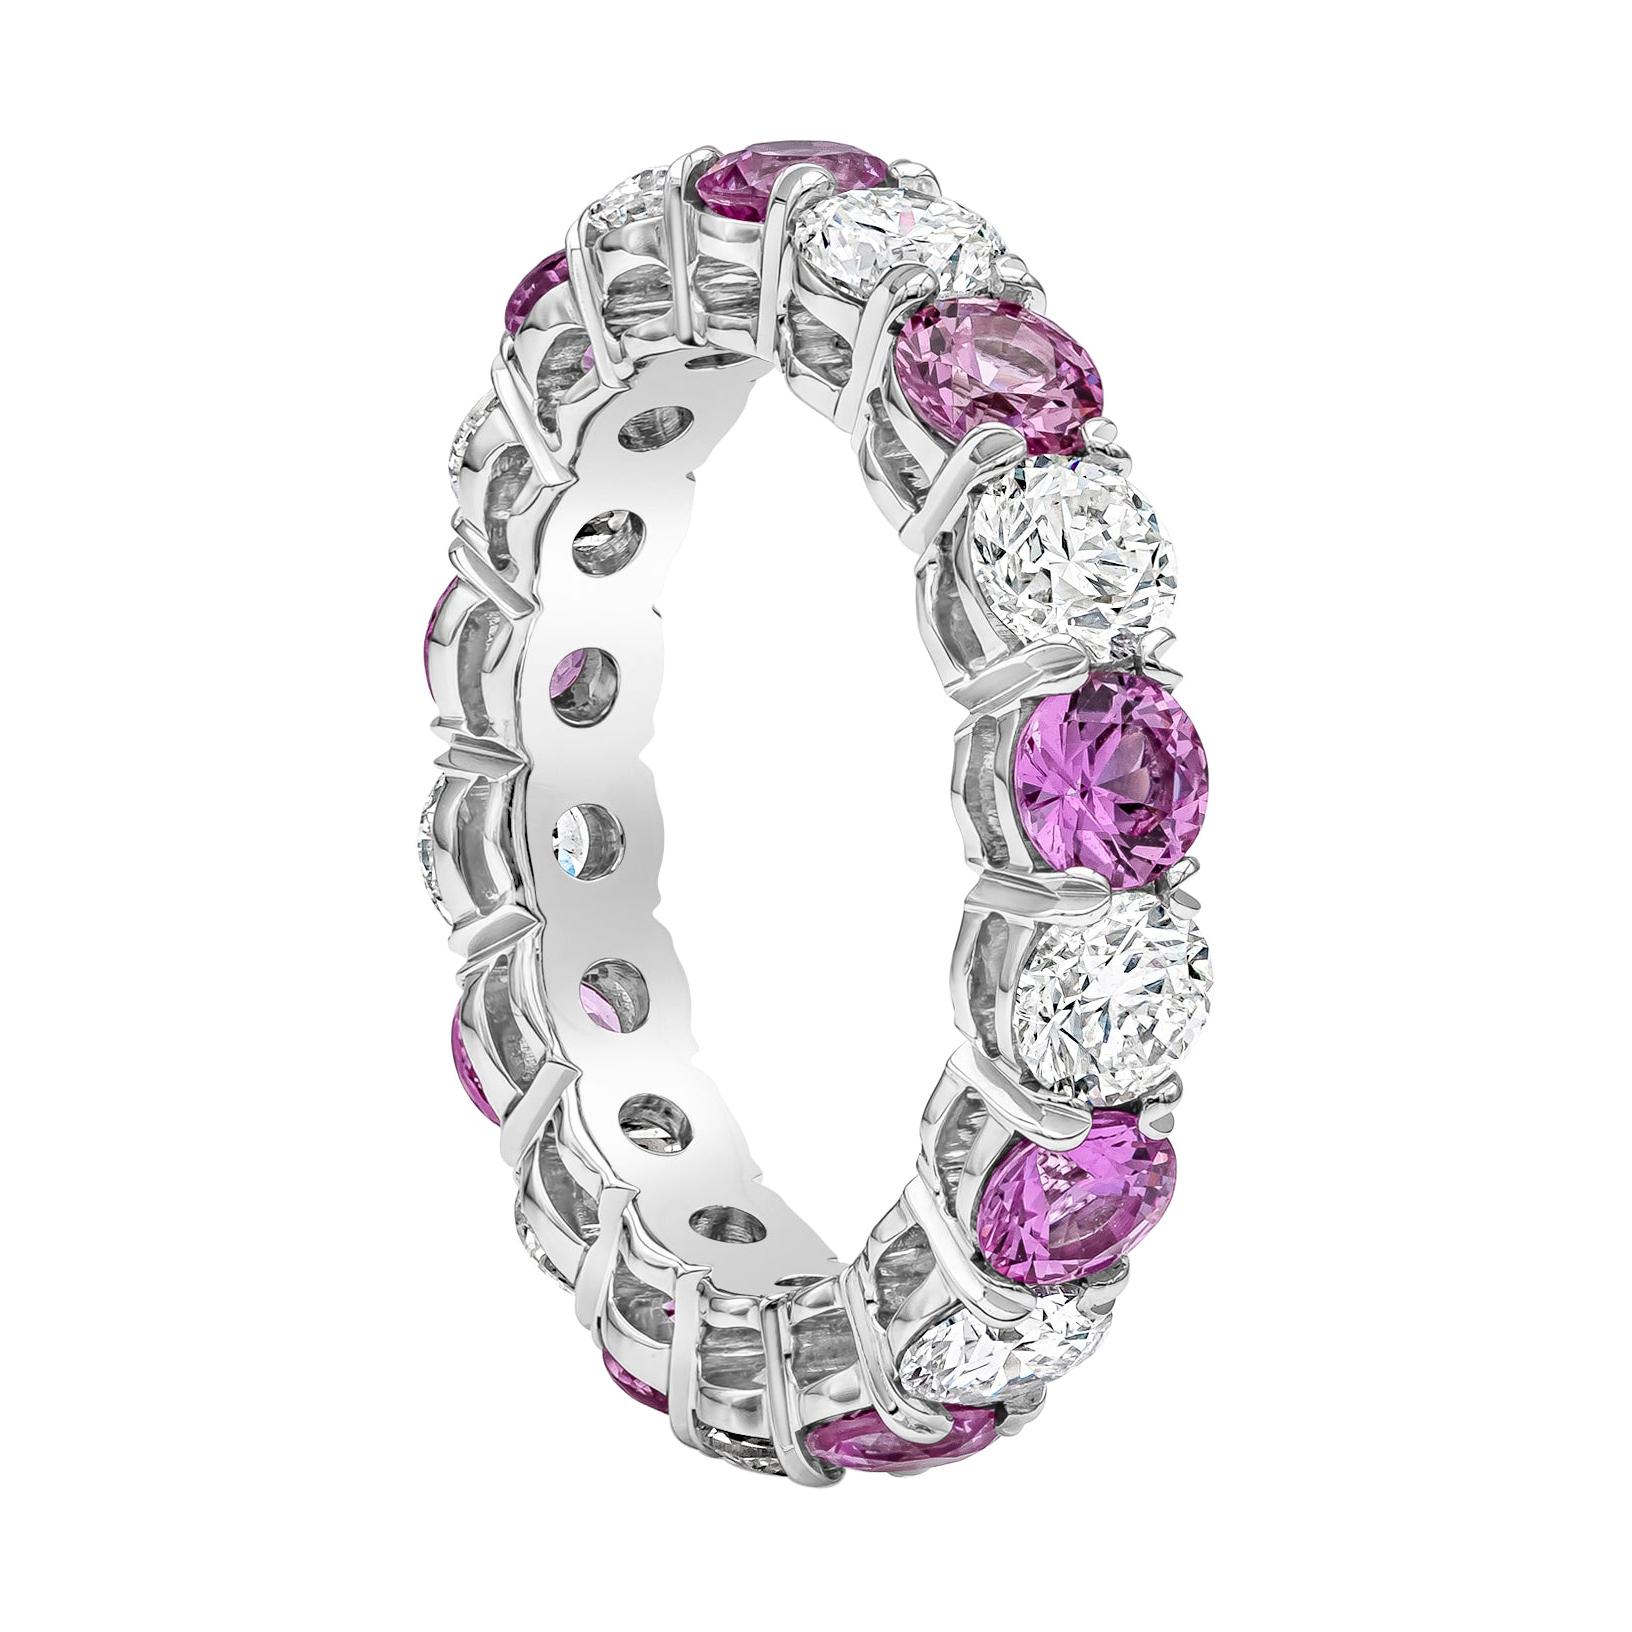 4.58 Carats Total Alternating Pink Sapphire and Diamond Eternity Wedding Band